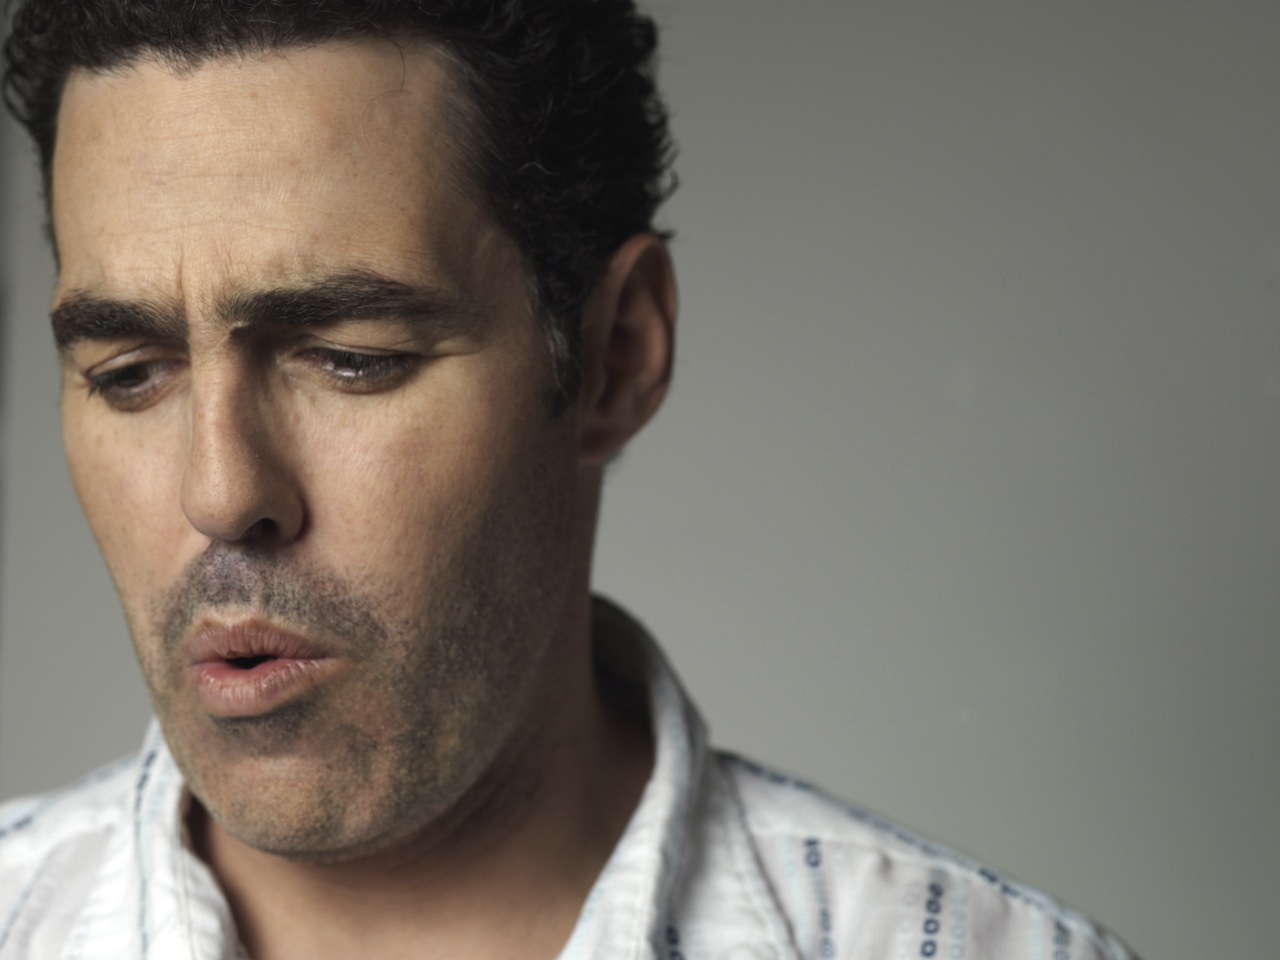 Adam Carolla: Forbes List Proves Equal Opportunity in America